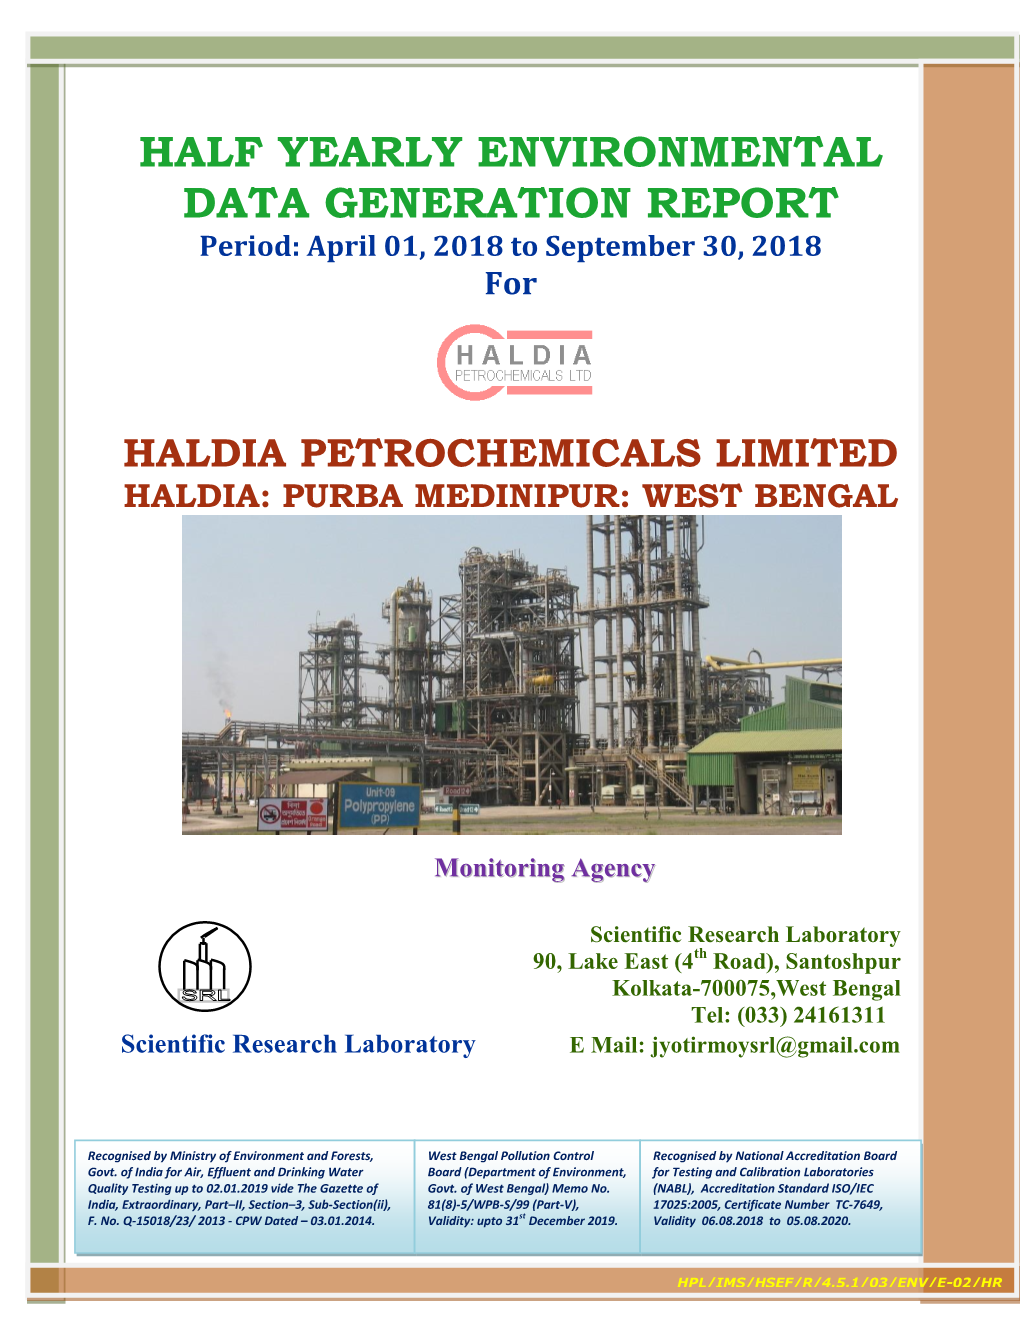 HALF YEARLY ENVIRONMENTAL DATA GENERATION REPORT Period: April 01, 2018 to September 30, 2018 For